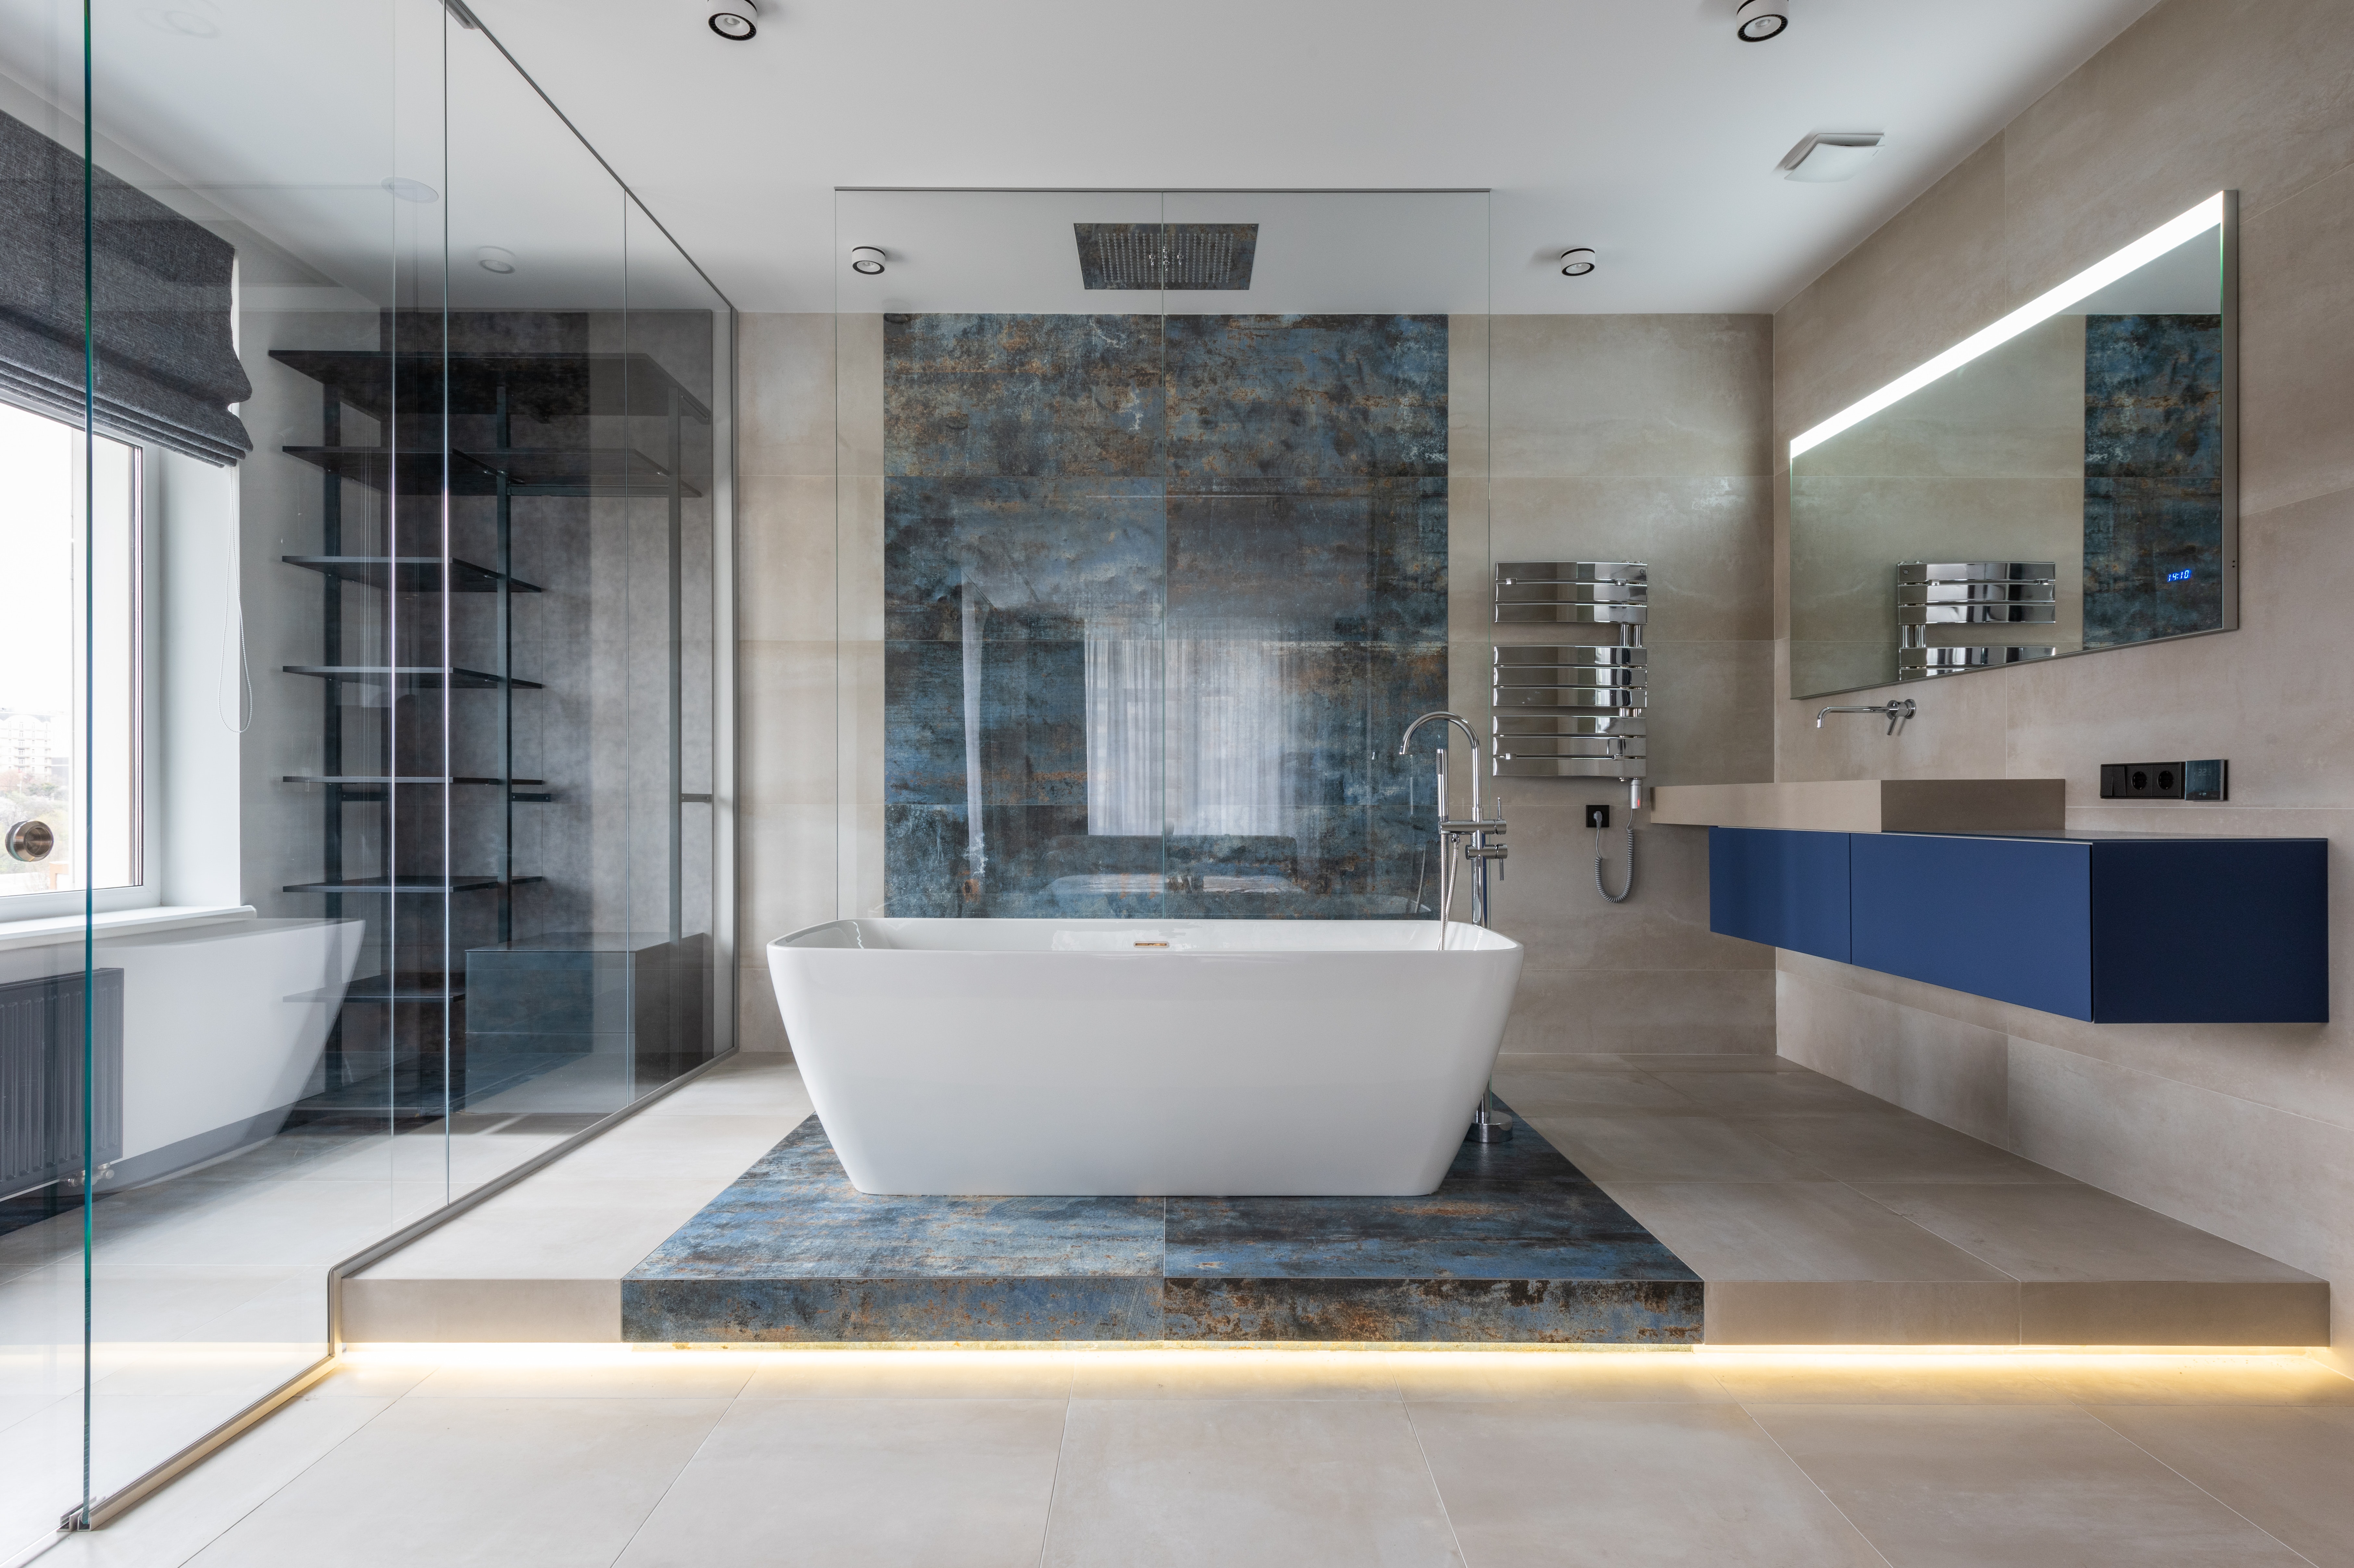 Lighting Design Tips: How To Light Your Bathroom Effectively